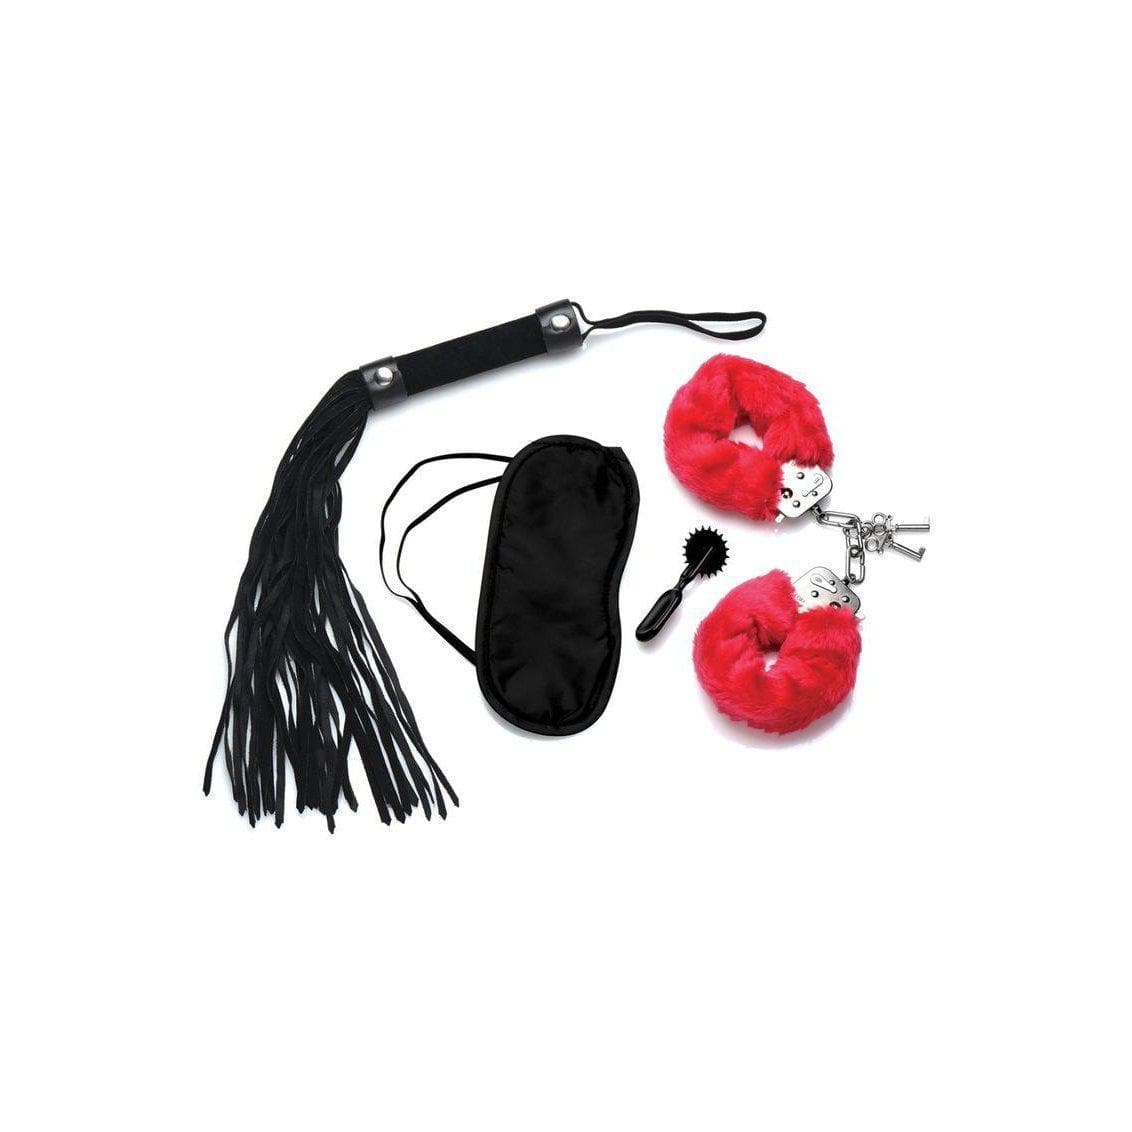 Frisky Passion Restraint Role Play 4 Piece Kit - Red/Black - Romantic Blessings